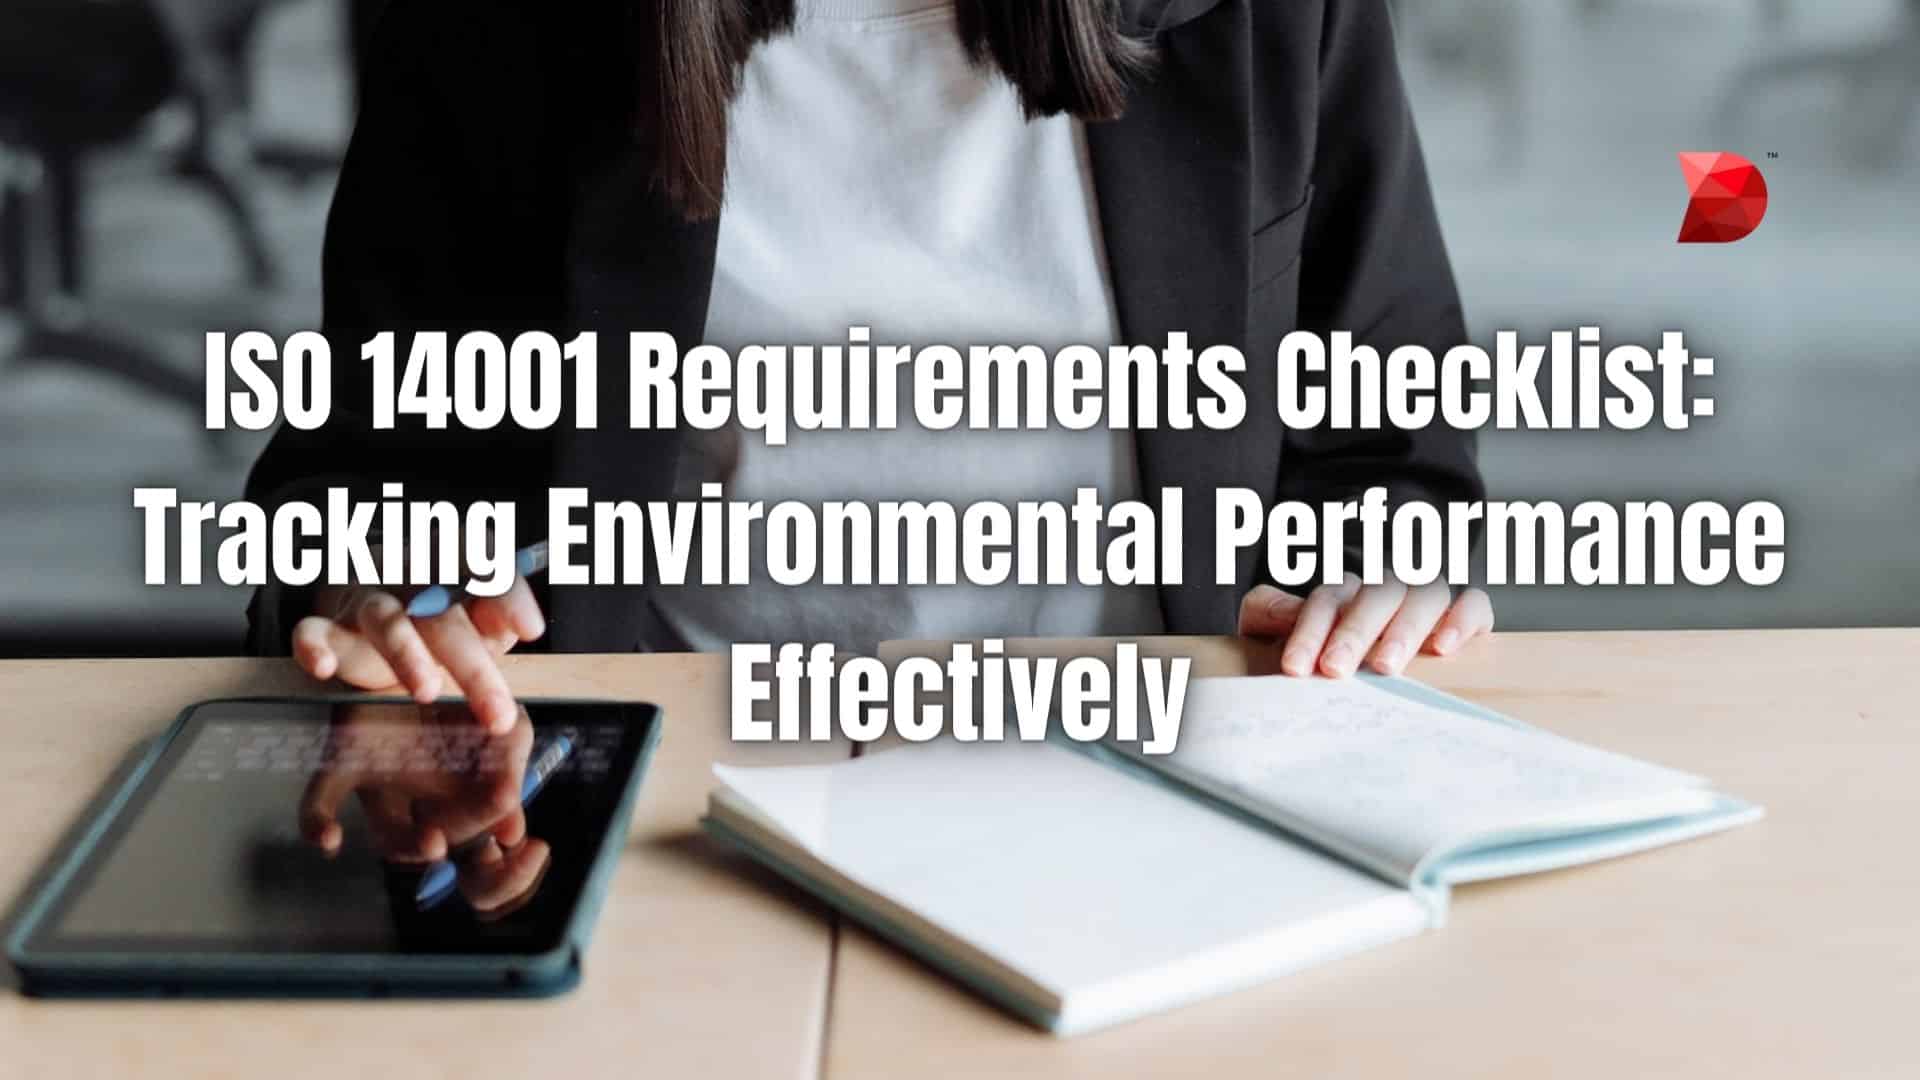 ISO 14001 Requirements Checklist Tracking Environmental Performance Effectively